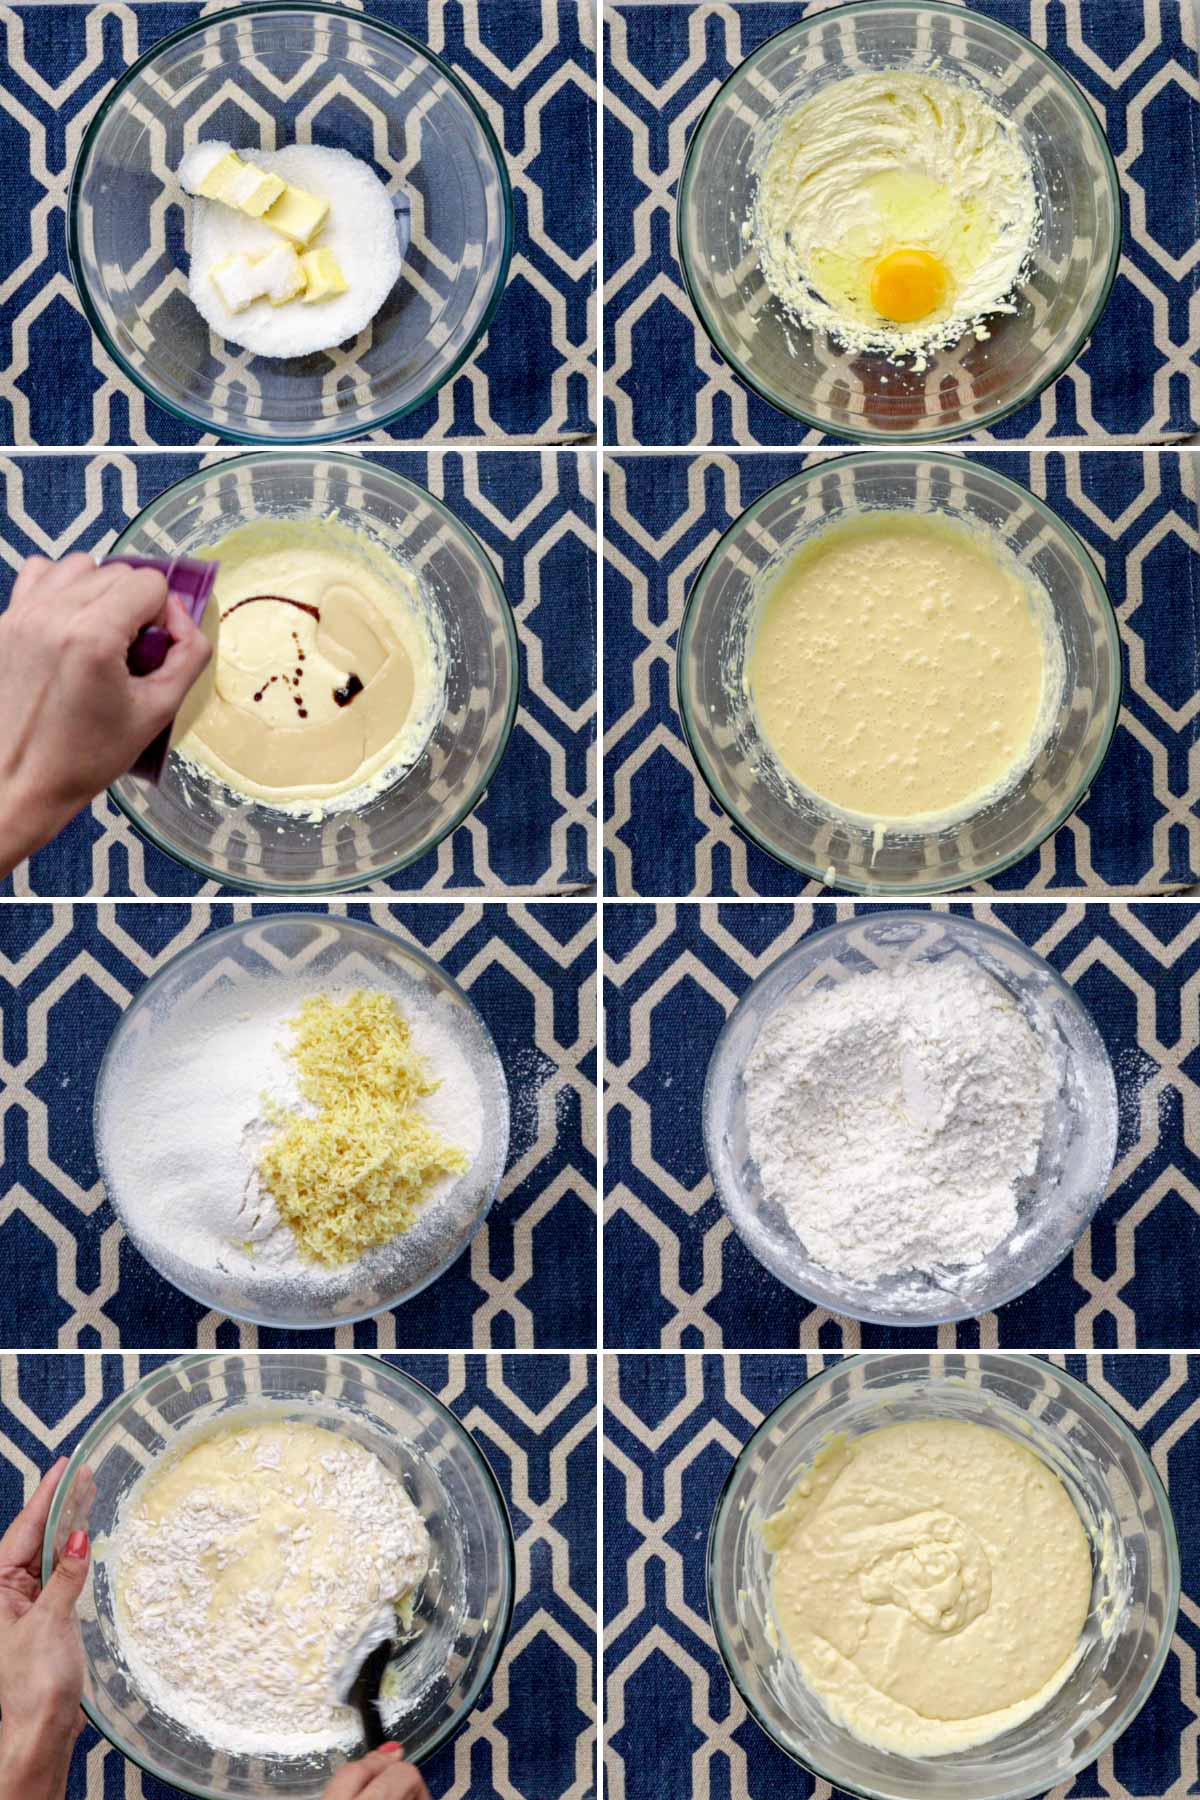 Step-by-step procedures in making cheese cupcakes.